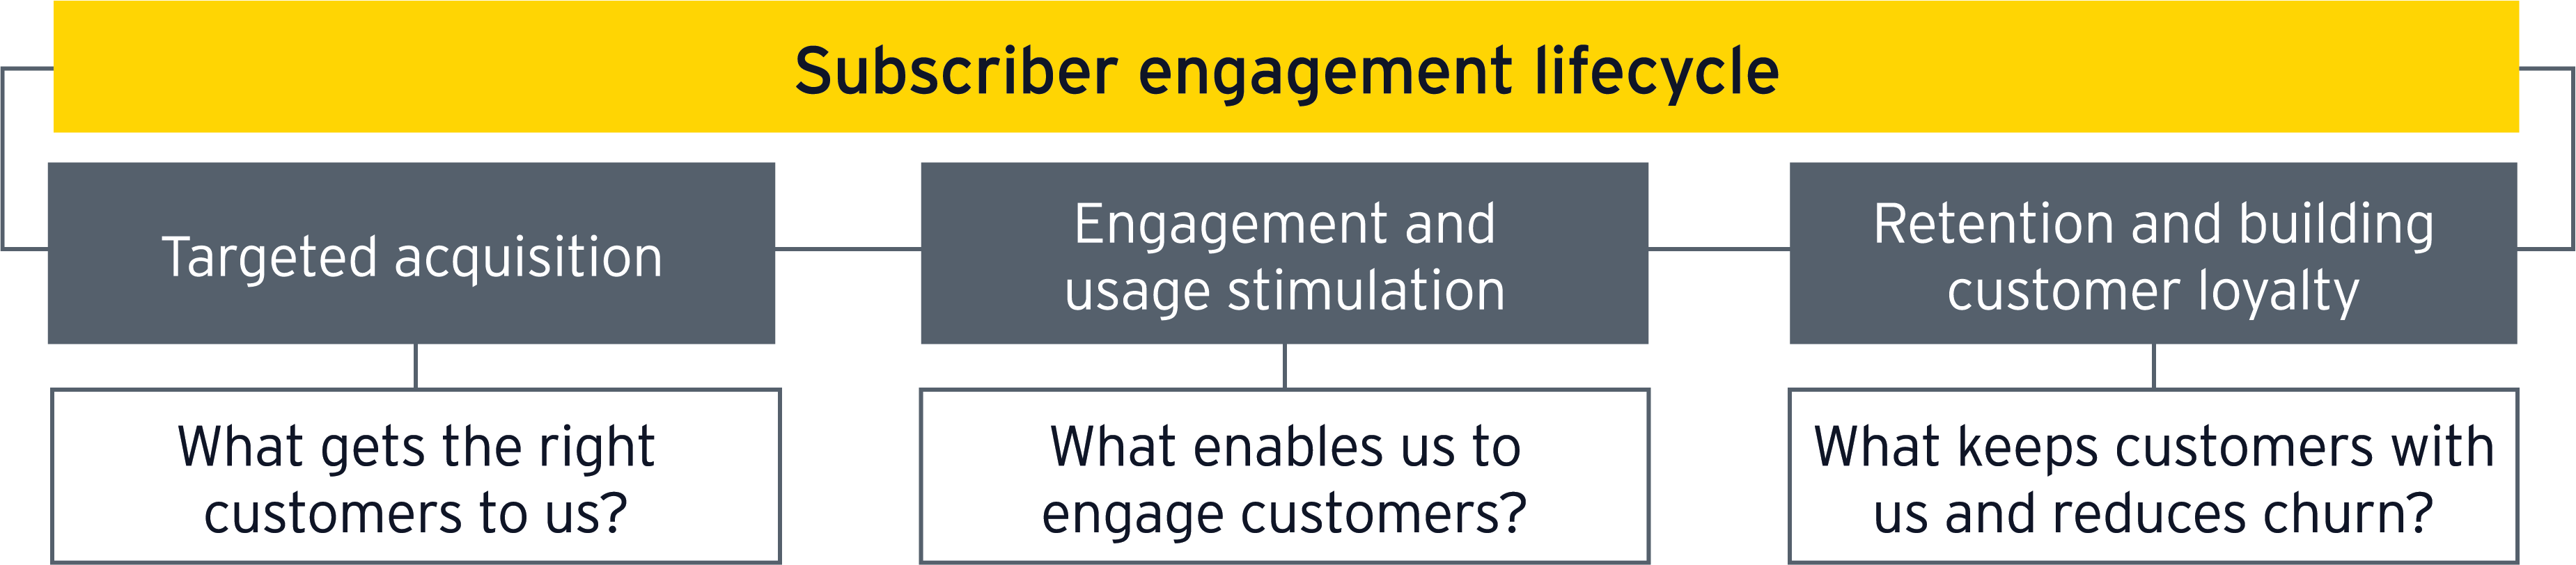 Subscriber engagement lifecycle